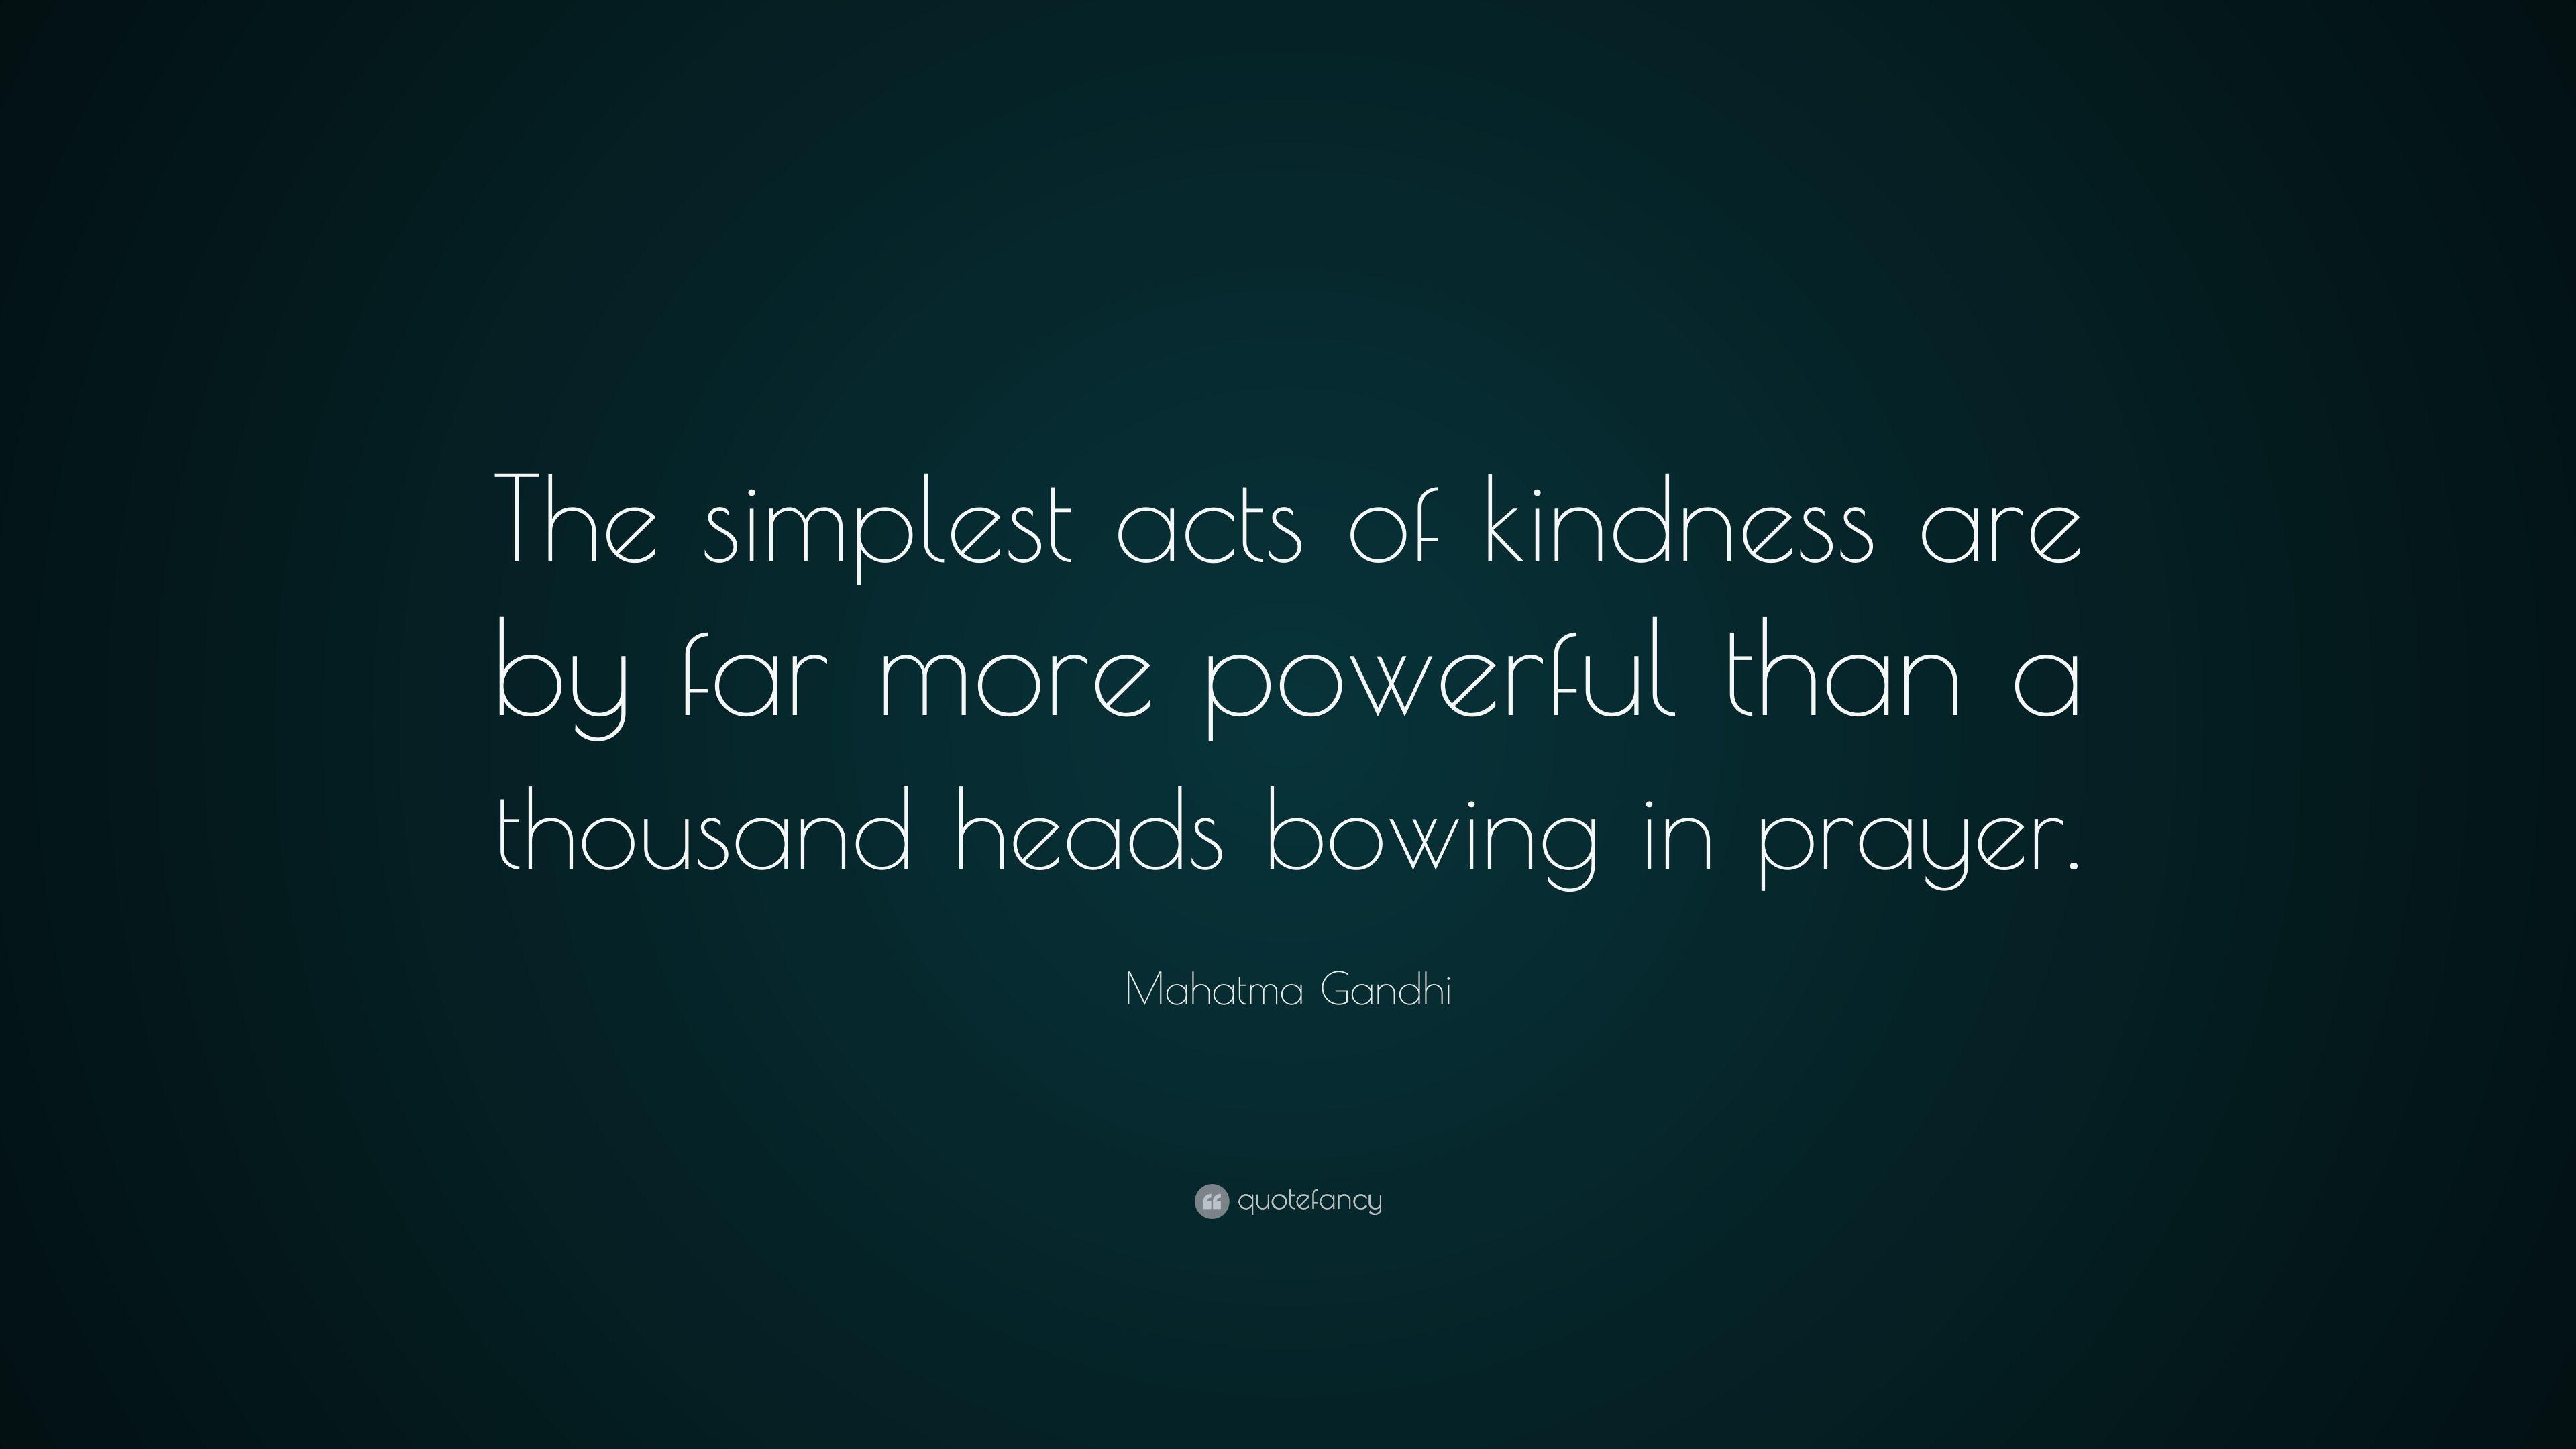 Mahatma Gandhi Quote: “The simplest acts of kindness are